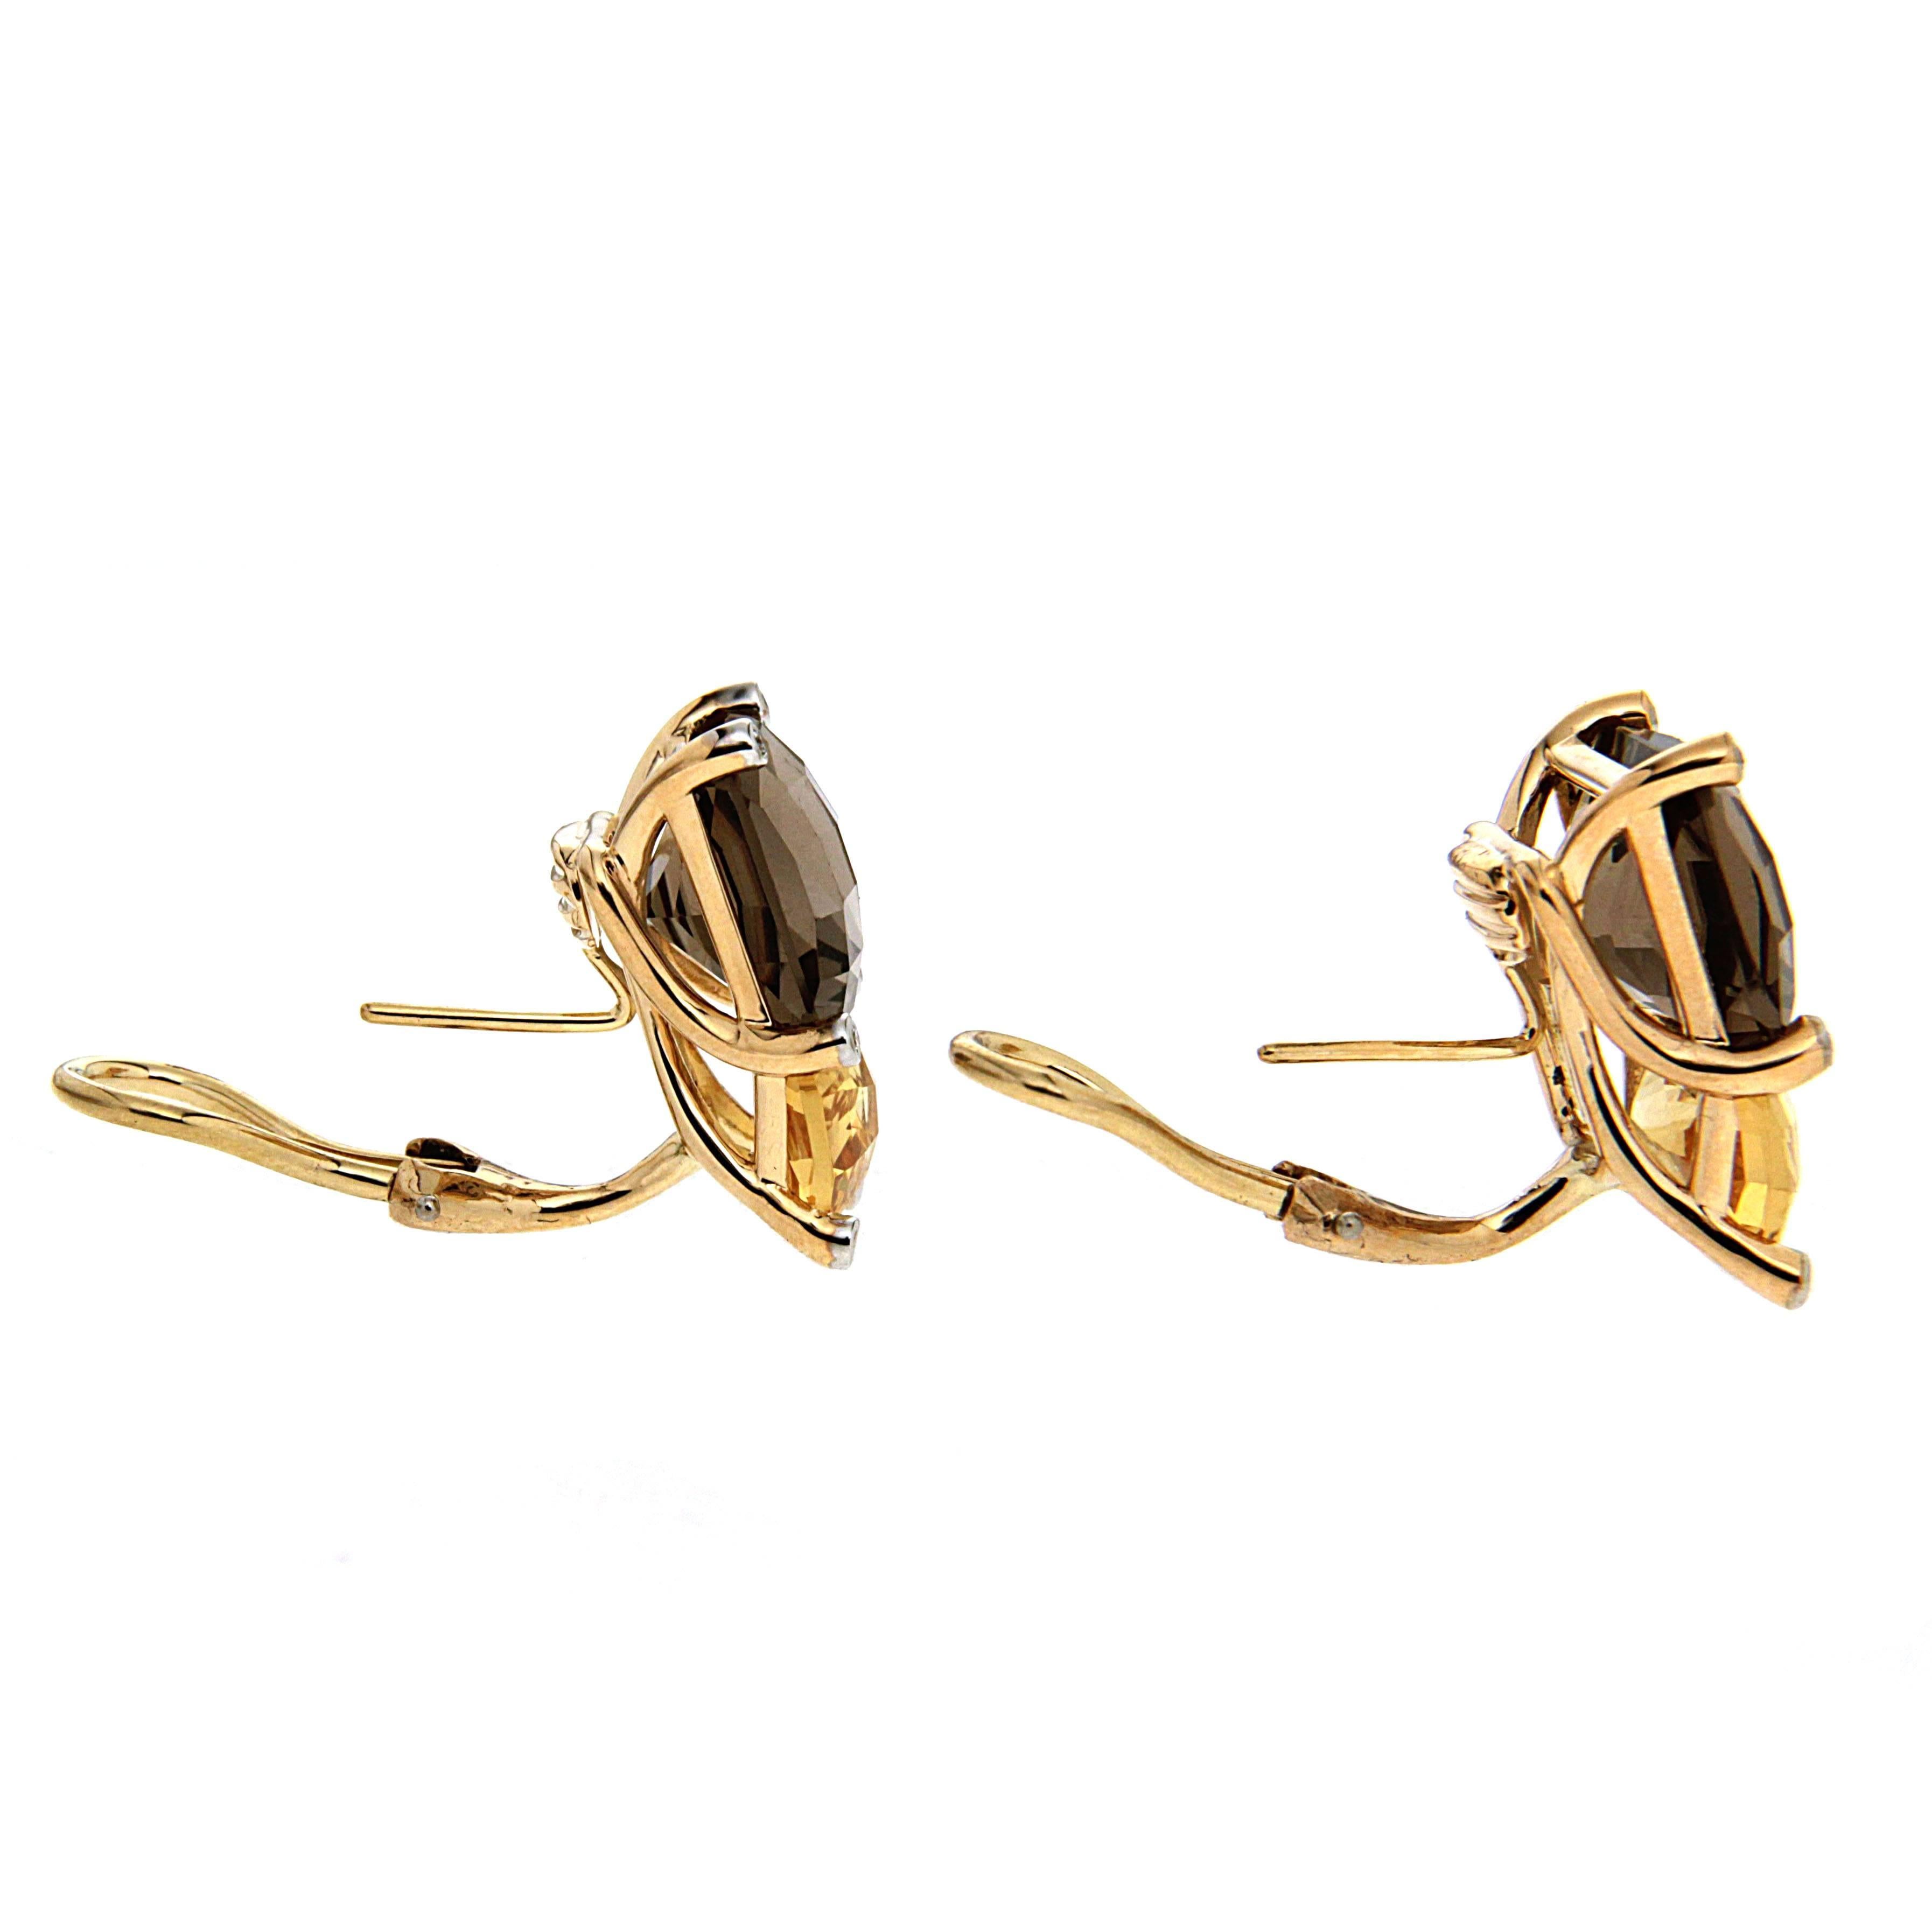 This lovely pair of COLORI Earrings features square cut quadrilateral Brown Topaz and special cut trapezoid Citrine with diamonds in the prongs. The earrings are finished with clip backs and posts in 18kt yellow gold. Posts can be added or removed